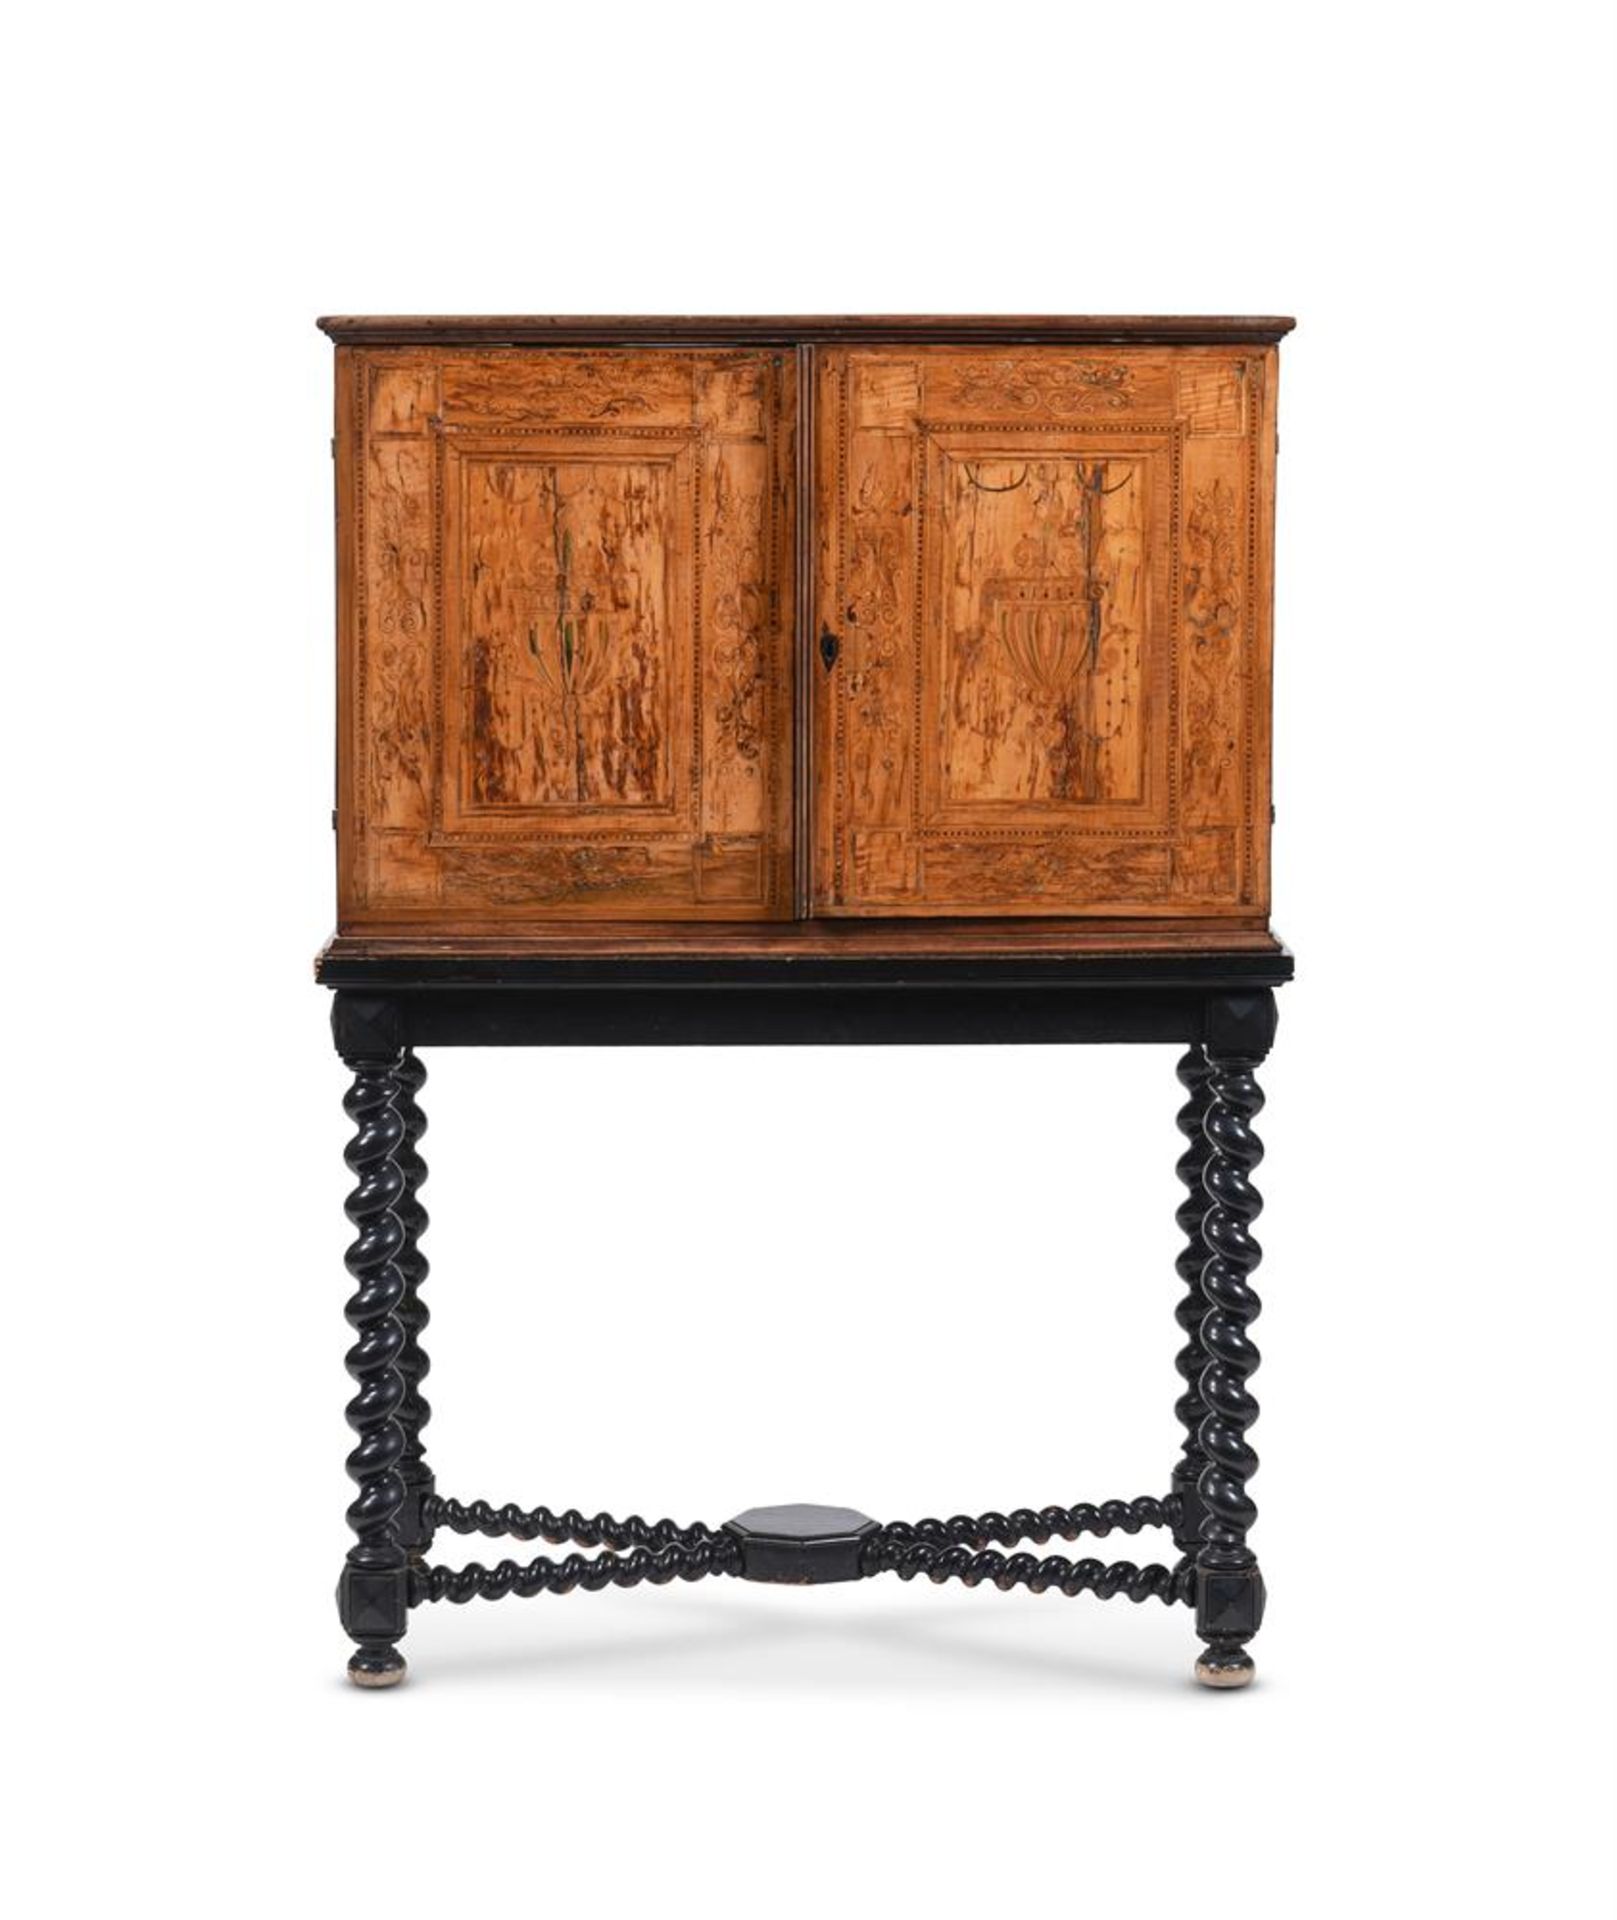 Y A SOUTH GERMAN SYCAMORE, FRUITWOOD AND SPECIMEN MARQUETRY COLLECTOR'S CABINET - Image 2 of 9